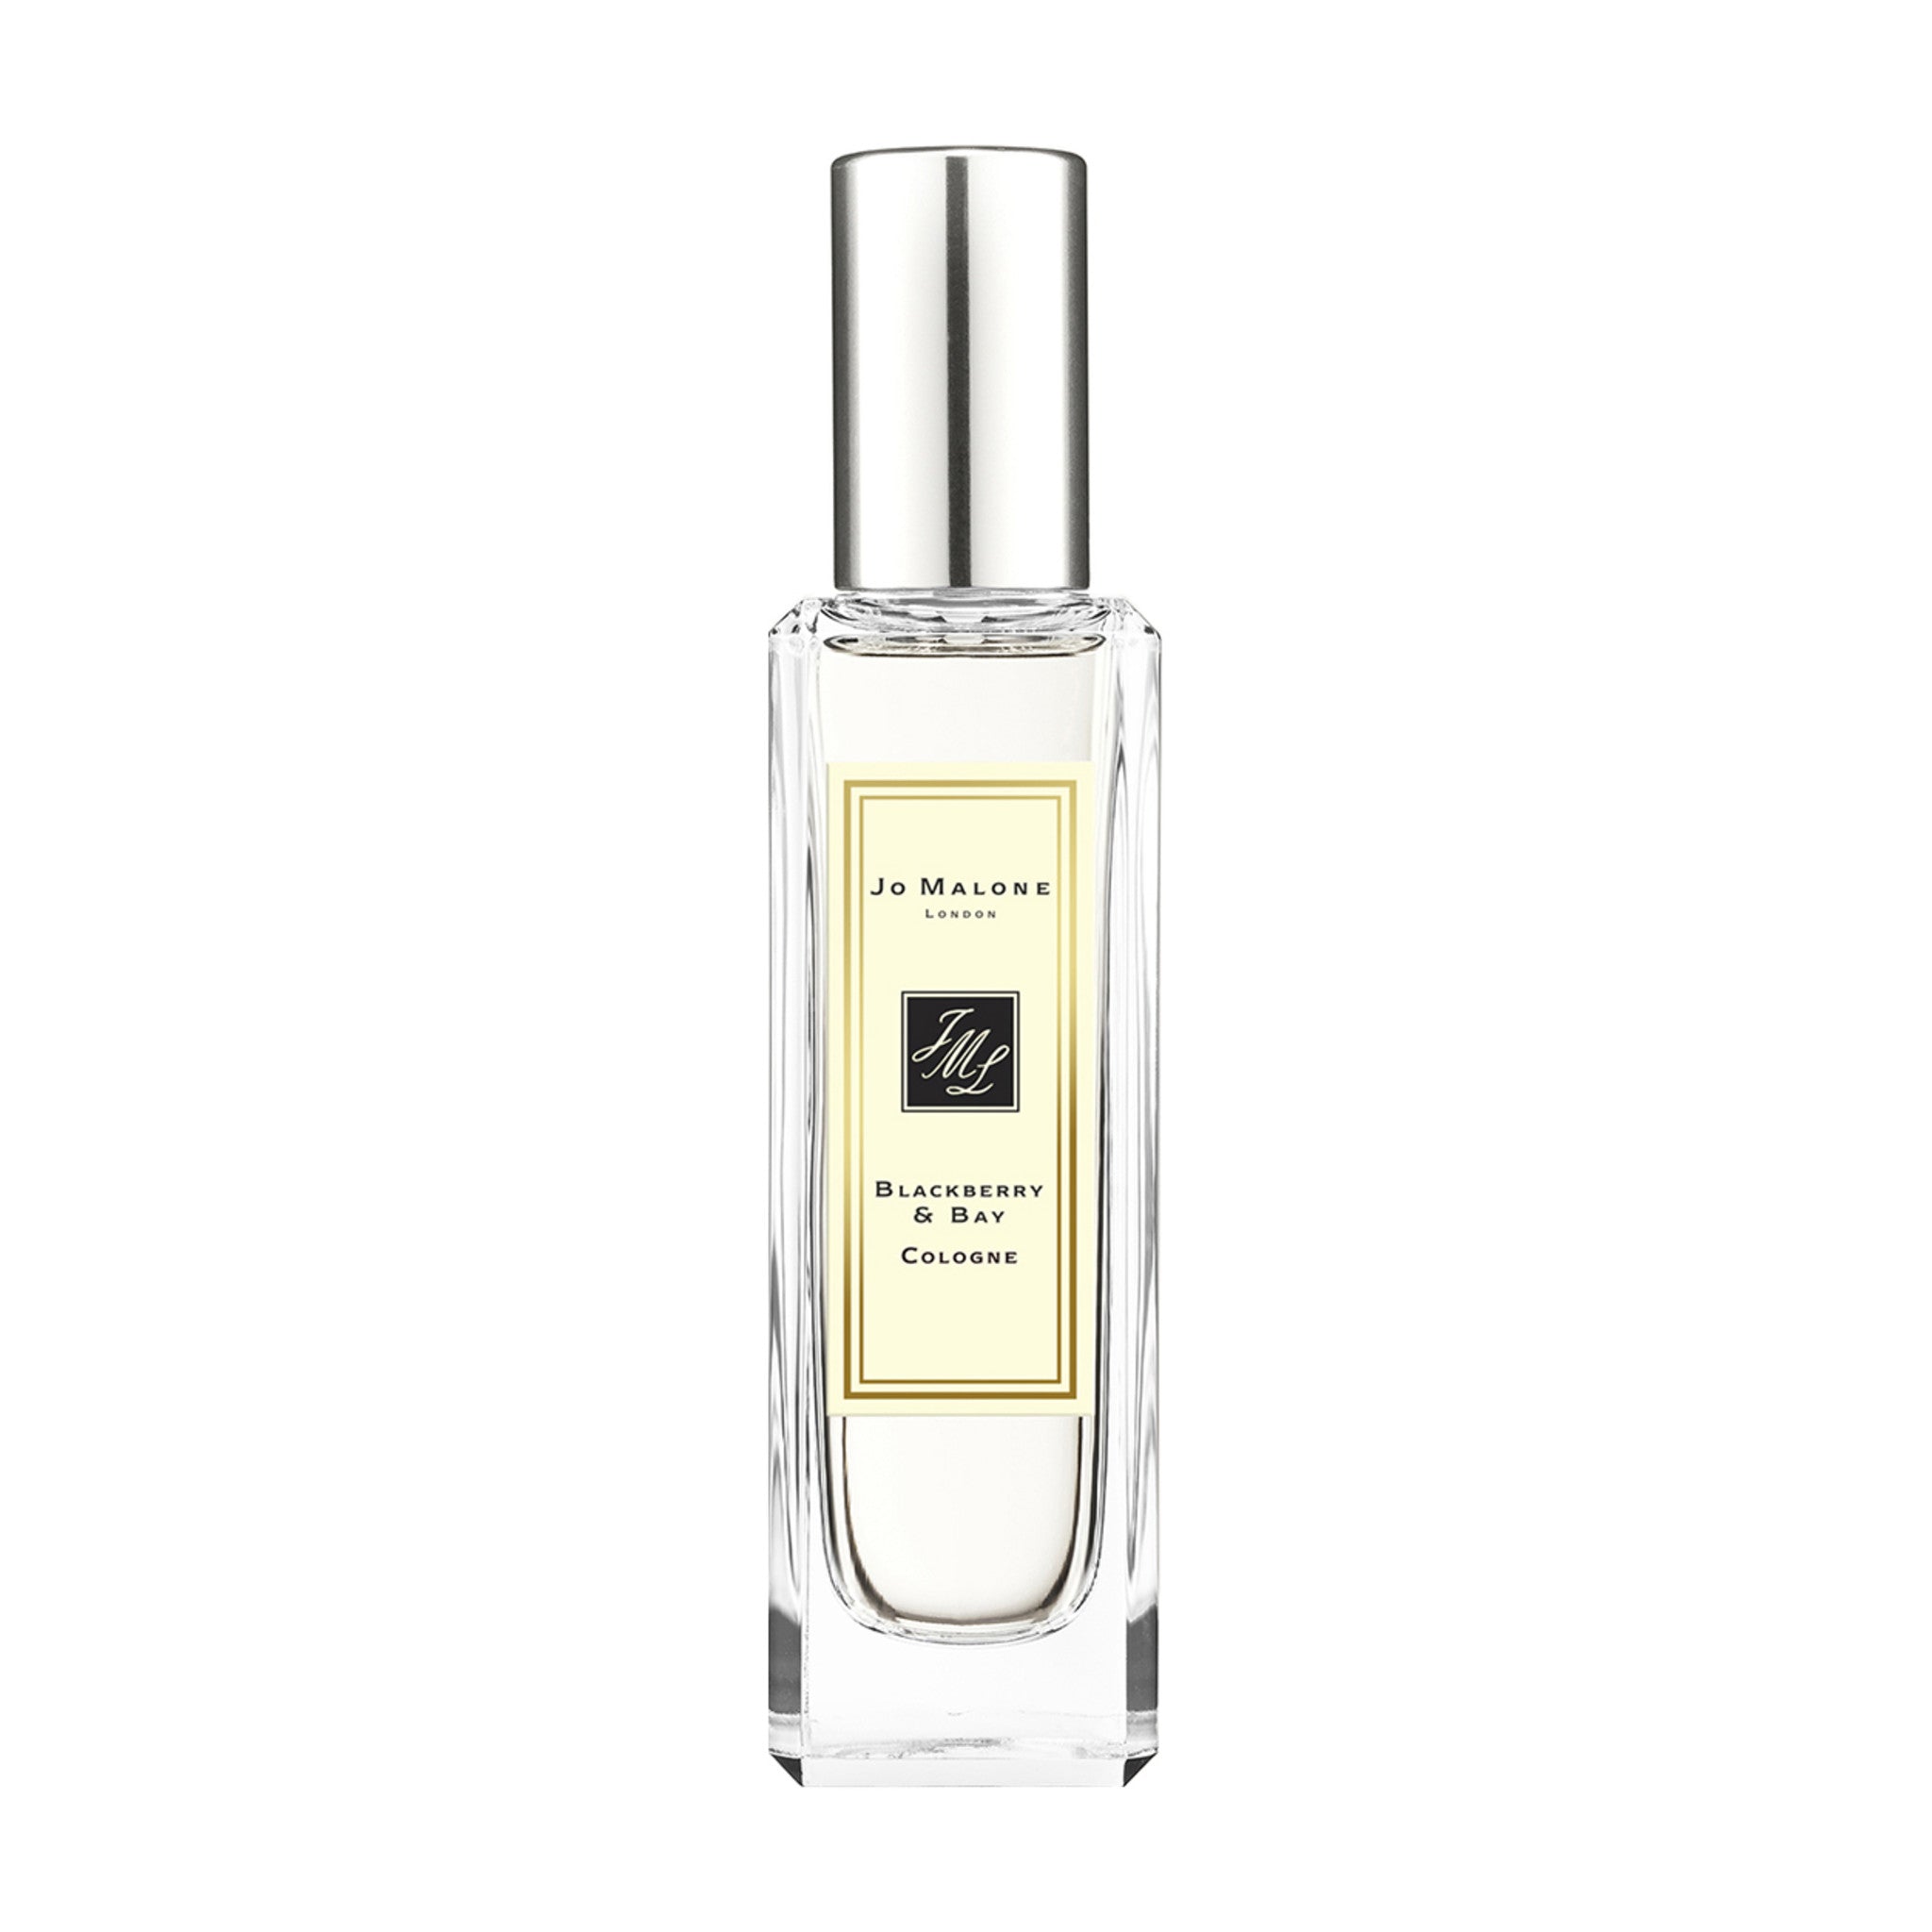 Jo Malone London Blackberry and Bay Cologne Size variant: 30 ml main image.